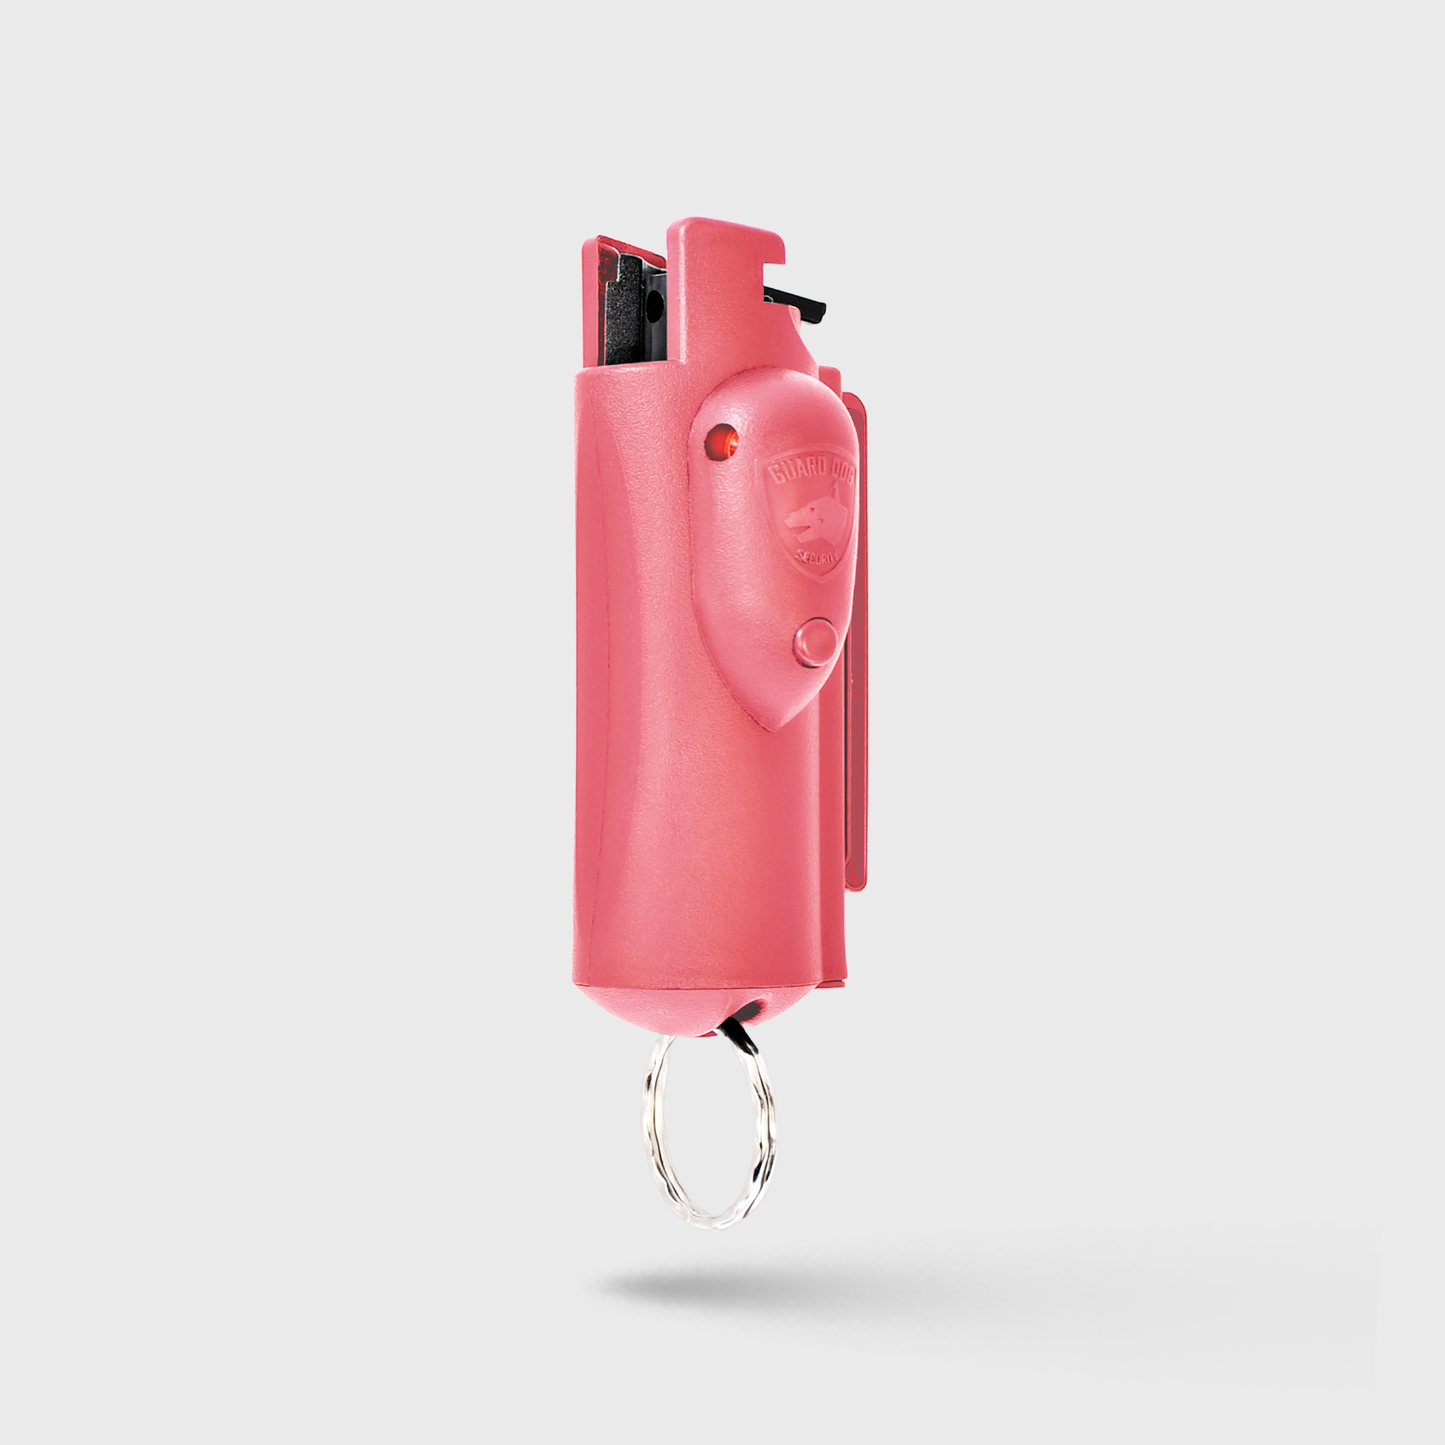 Guard Dog Security Guard Dog AccuFire Keychain Pepper Spray with Laser  Sight, Hottest Burn, Compact and Lightweight in the Pepper Spray department  at